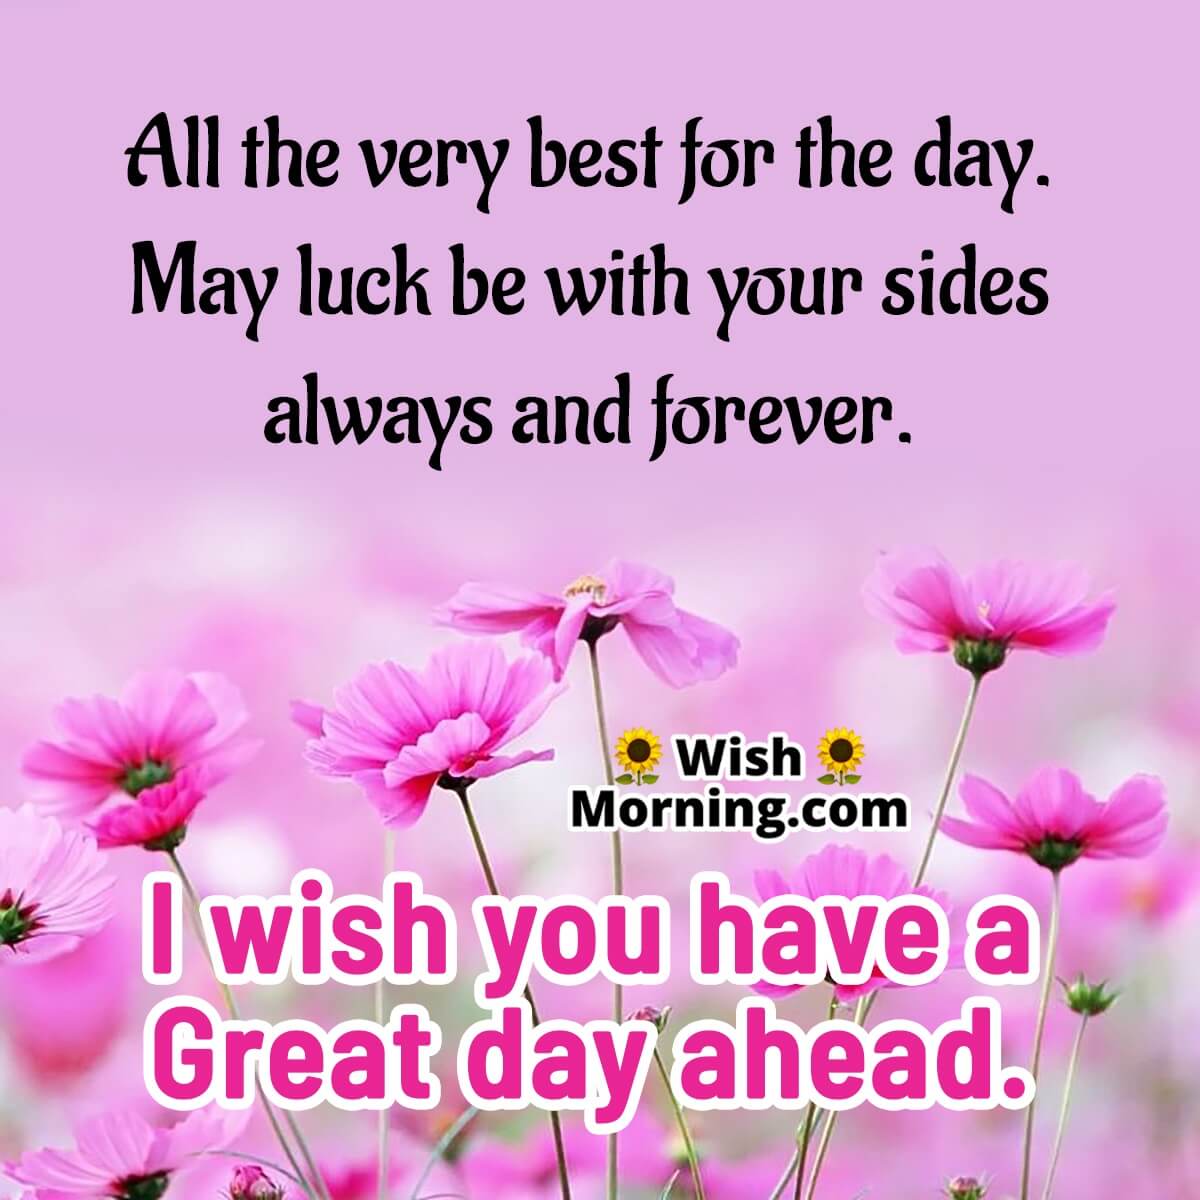 Great Day Wish Image